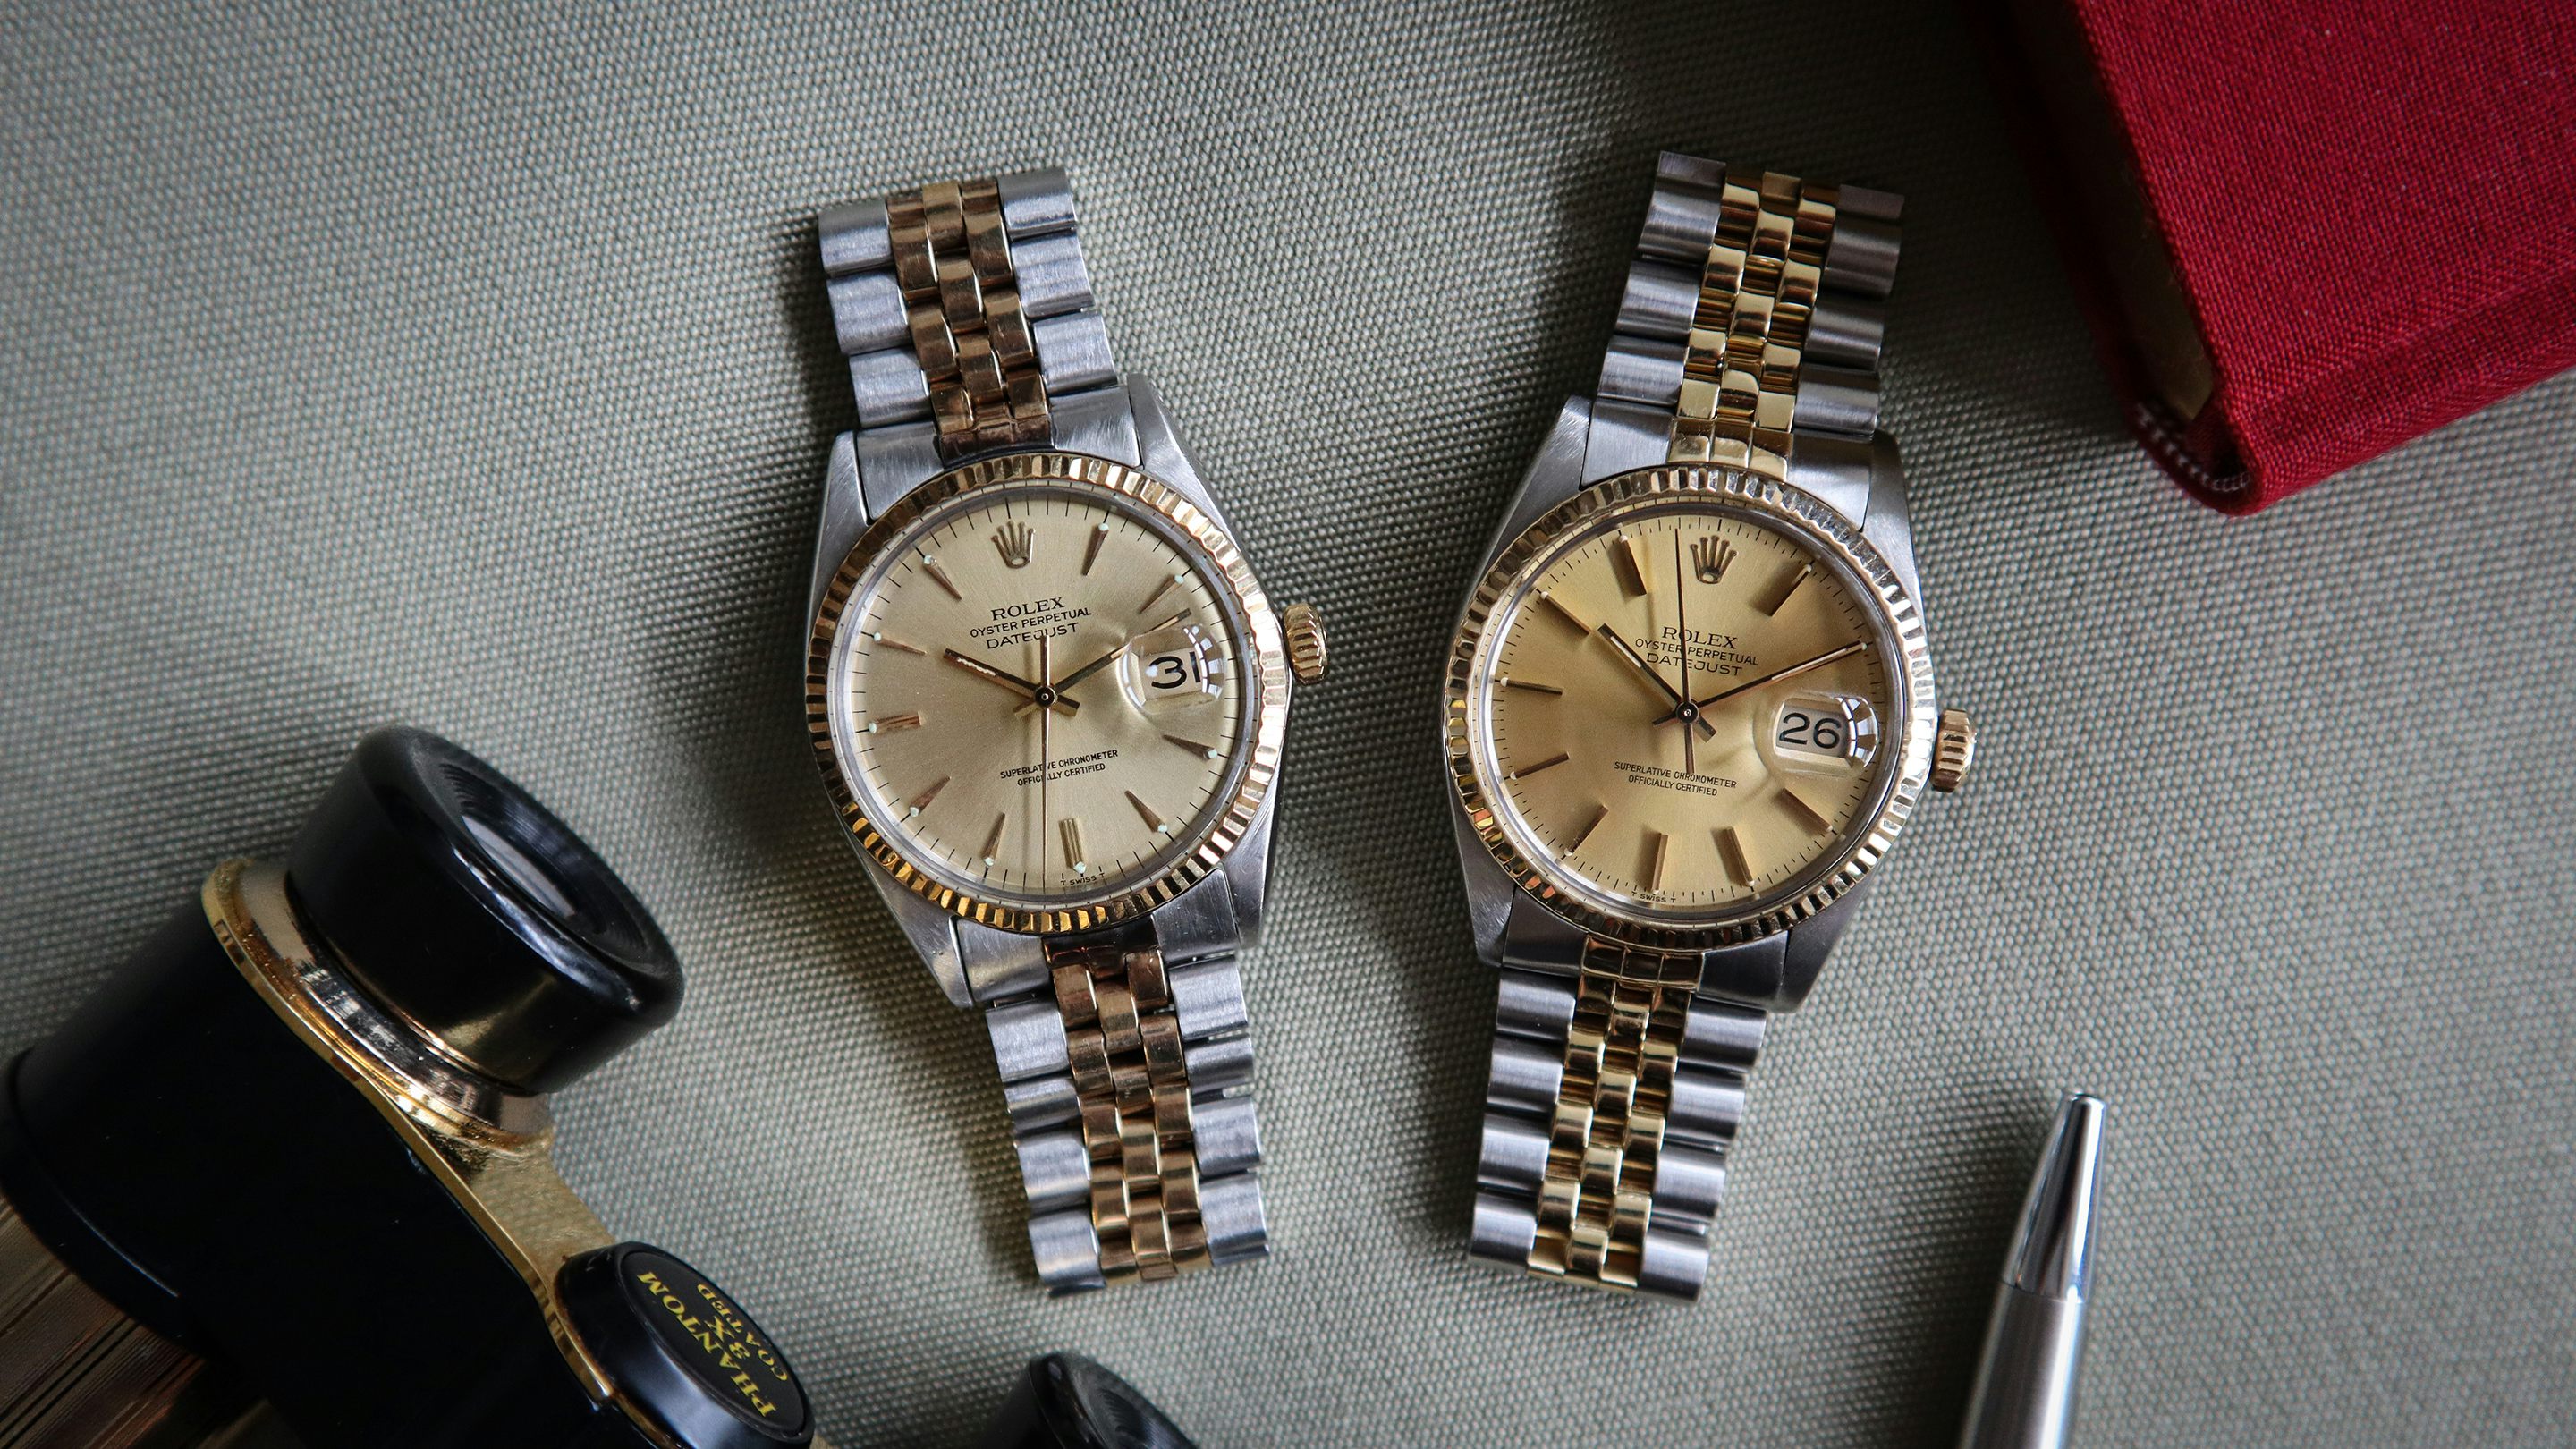 A Of Two-Tone Rolex Hodinkee